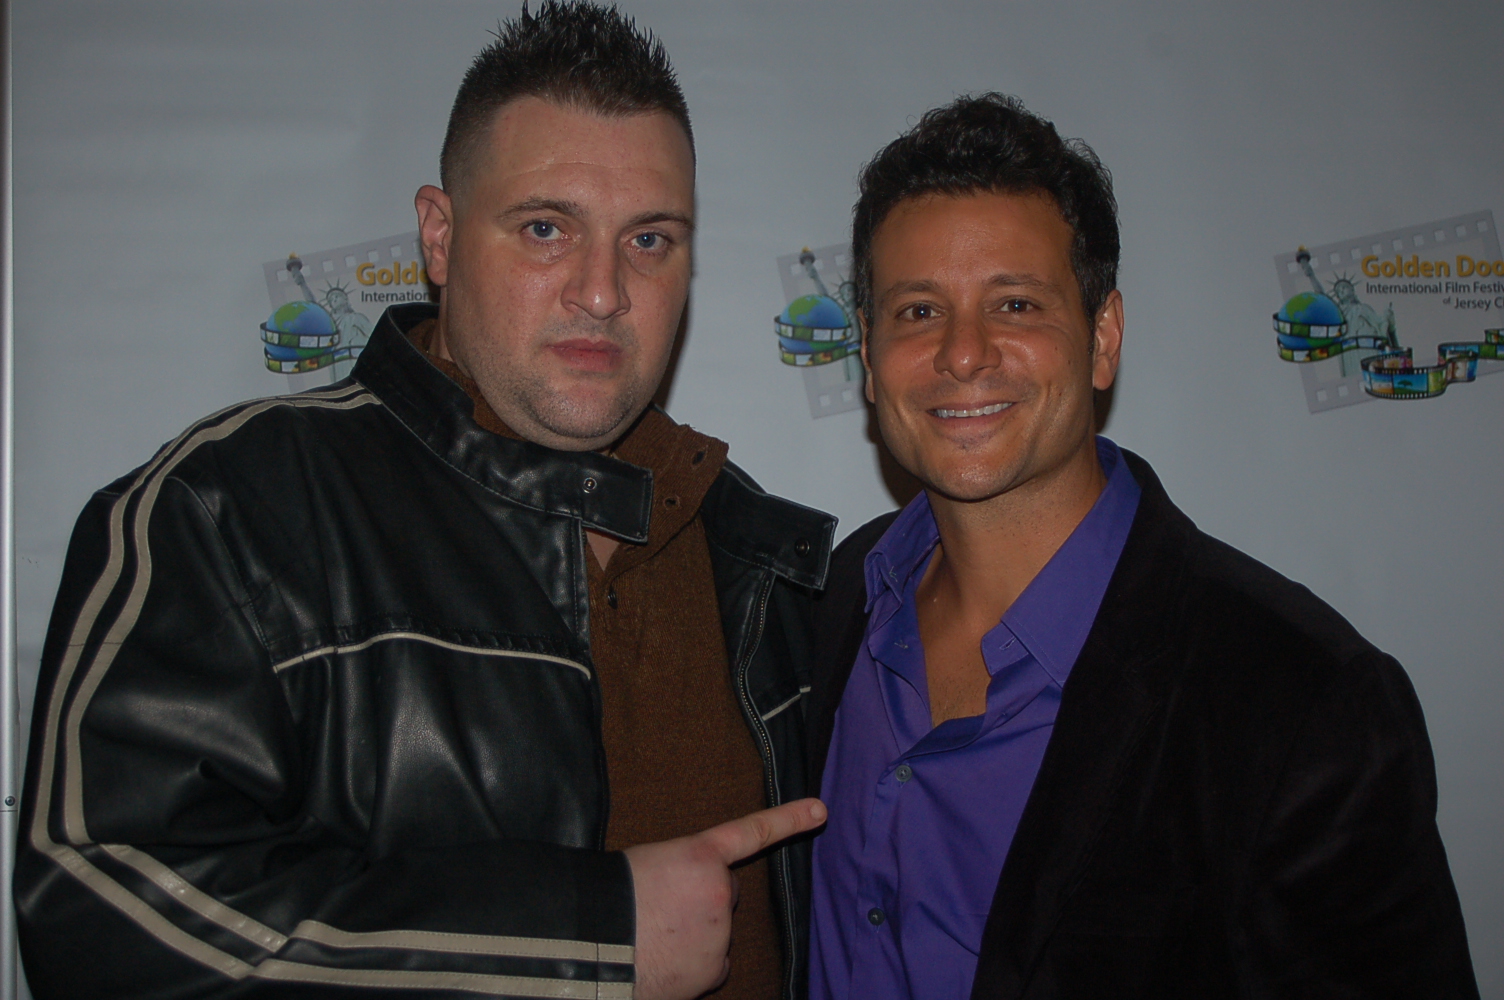 WITH BILL SORVINO AT THE GDFF IN JC